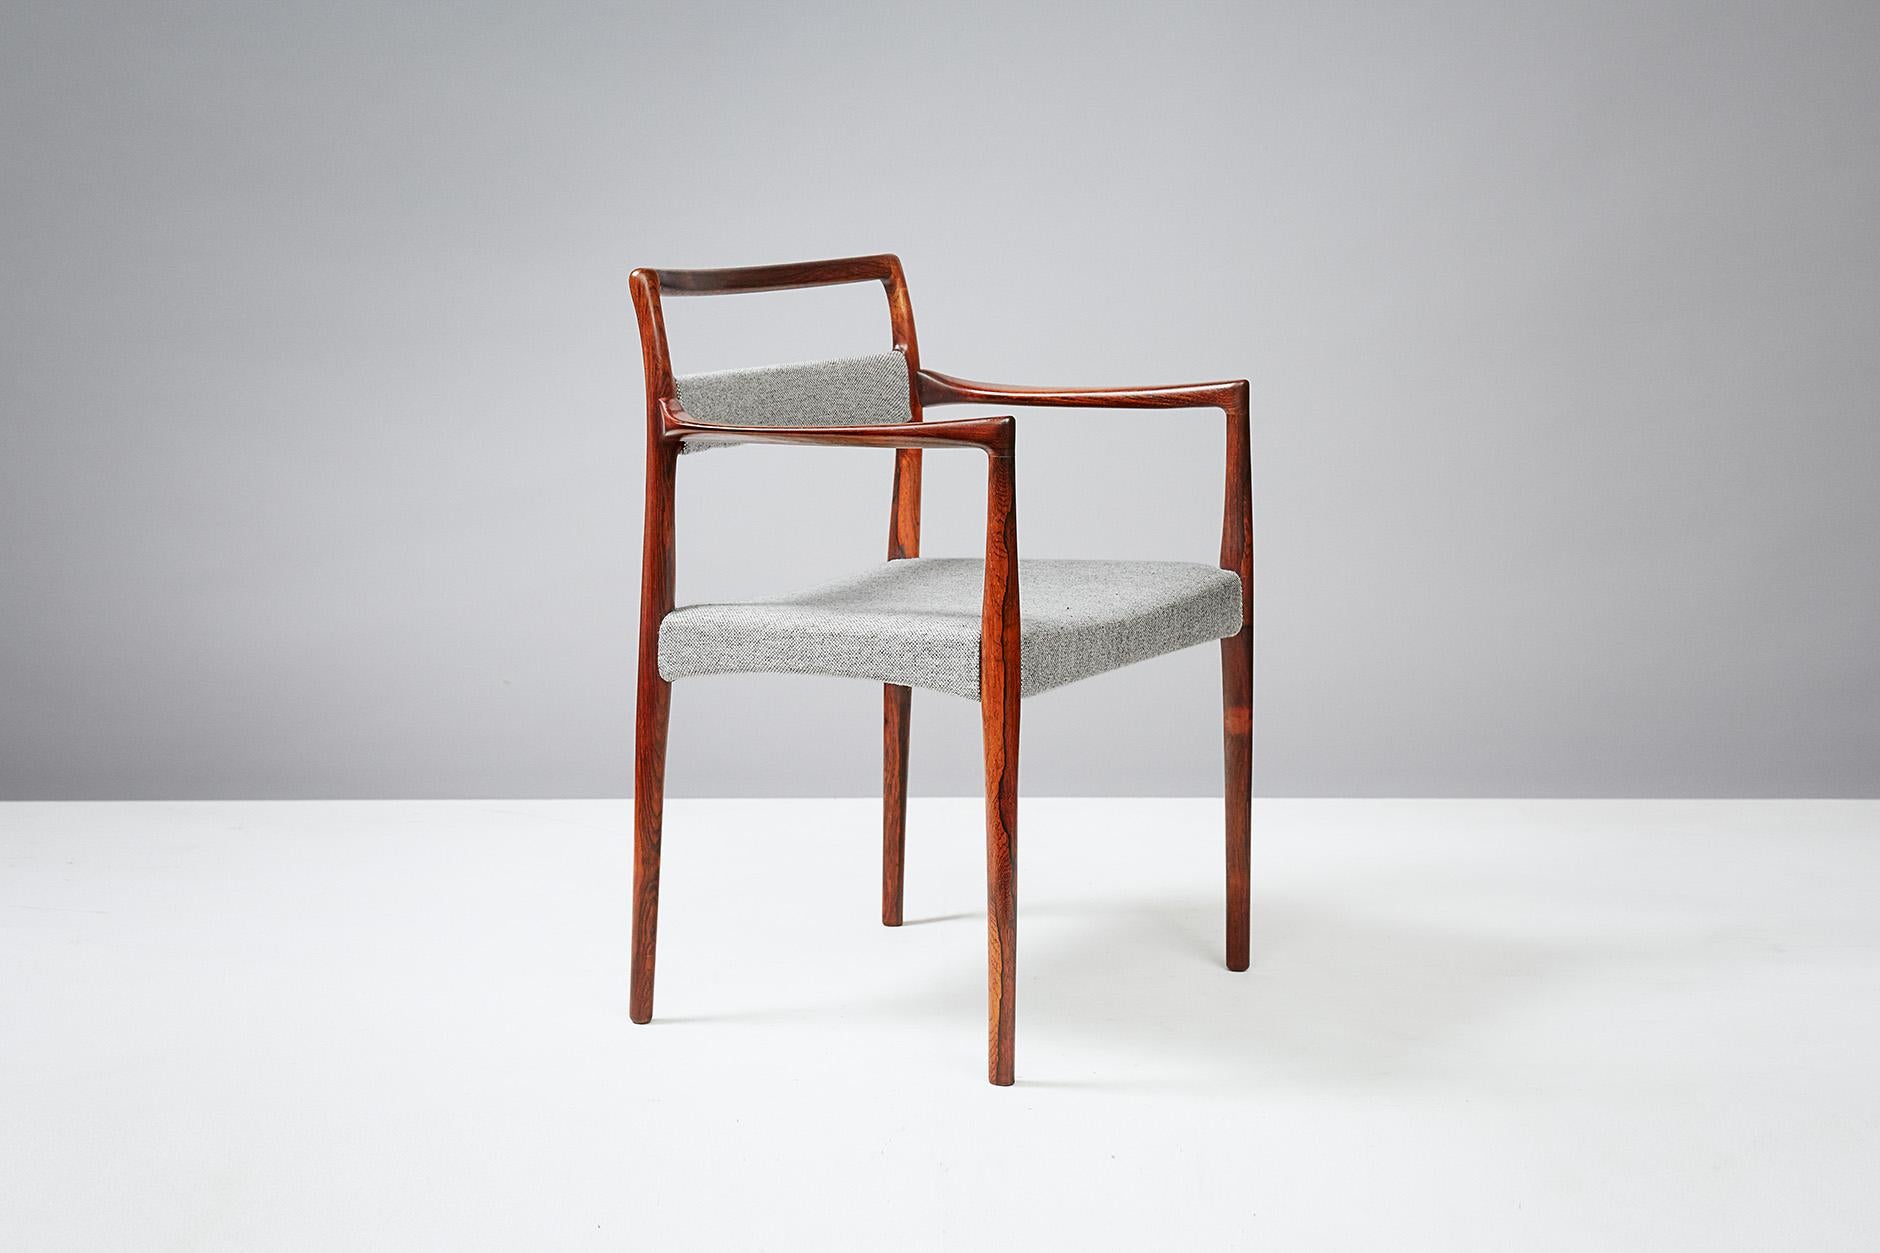 Kai Kristiansen

Exotic wood armchair, circa 1960

Produced by Oddense Maskinsnedkeri A/S. Exotic wood frame with upholstered seat and back in Kvadrat Hallingdal wool fabric.